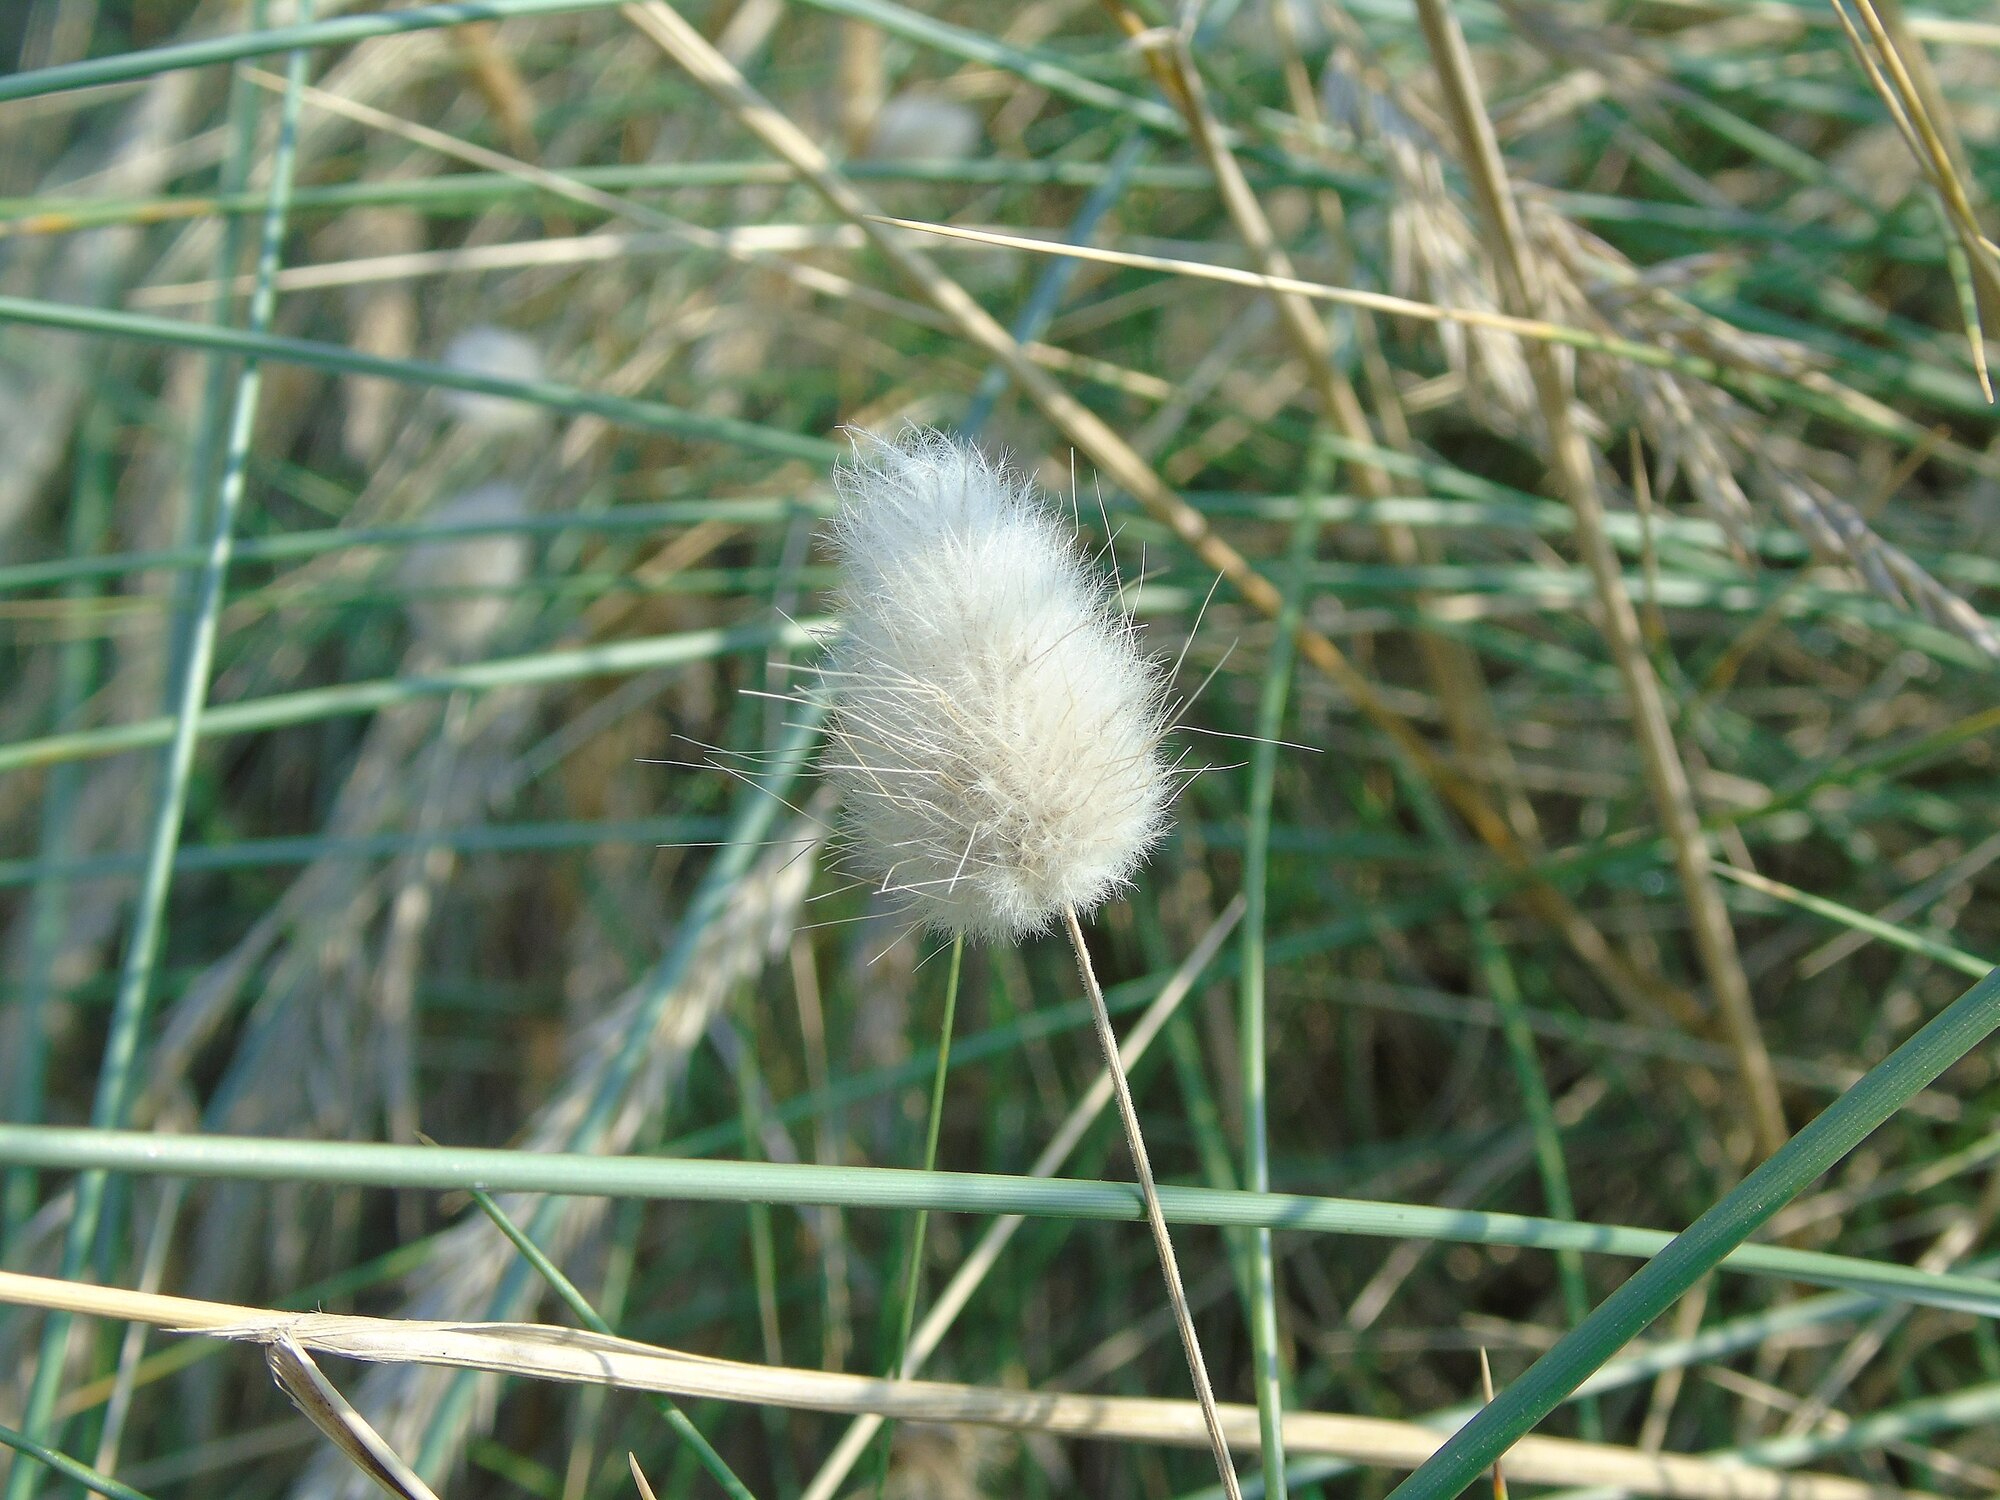 Photograph showing an inflorescence of bunny tails, which looks fluffy and white.